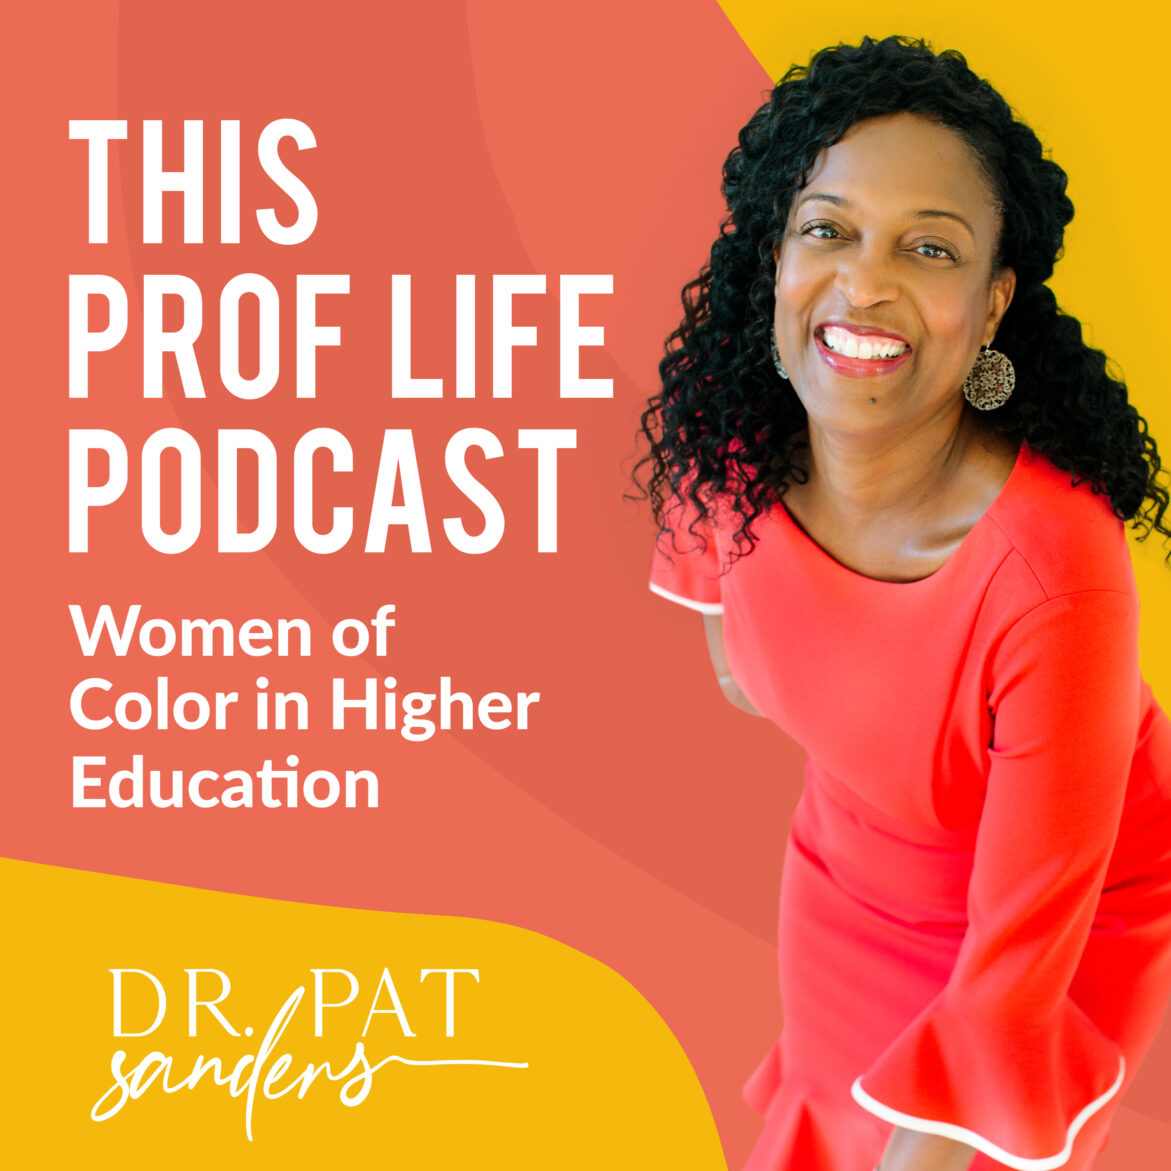 Black Podcasting - Diversity, Equity and Inclusion in Higher Education and Other Workspaces